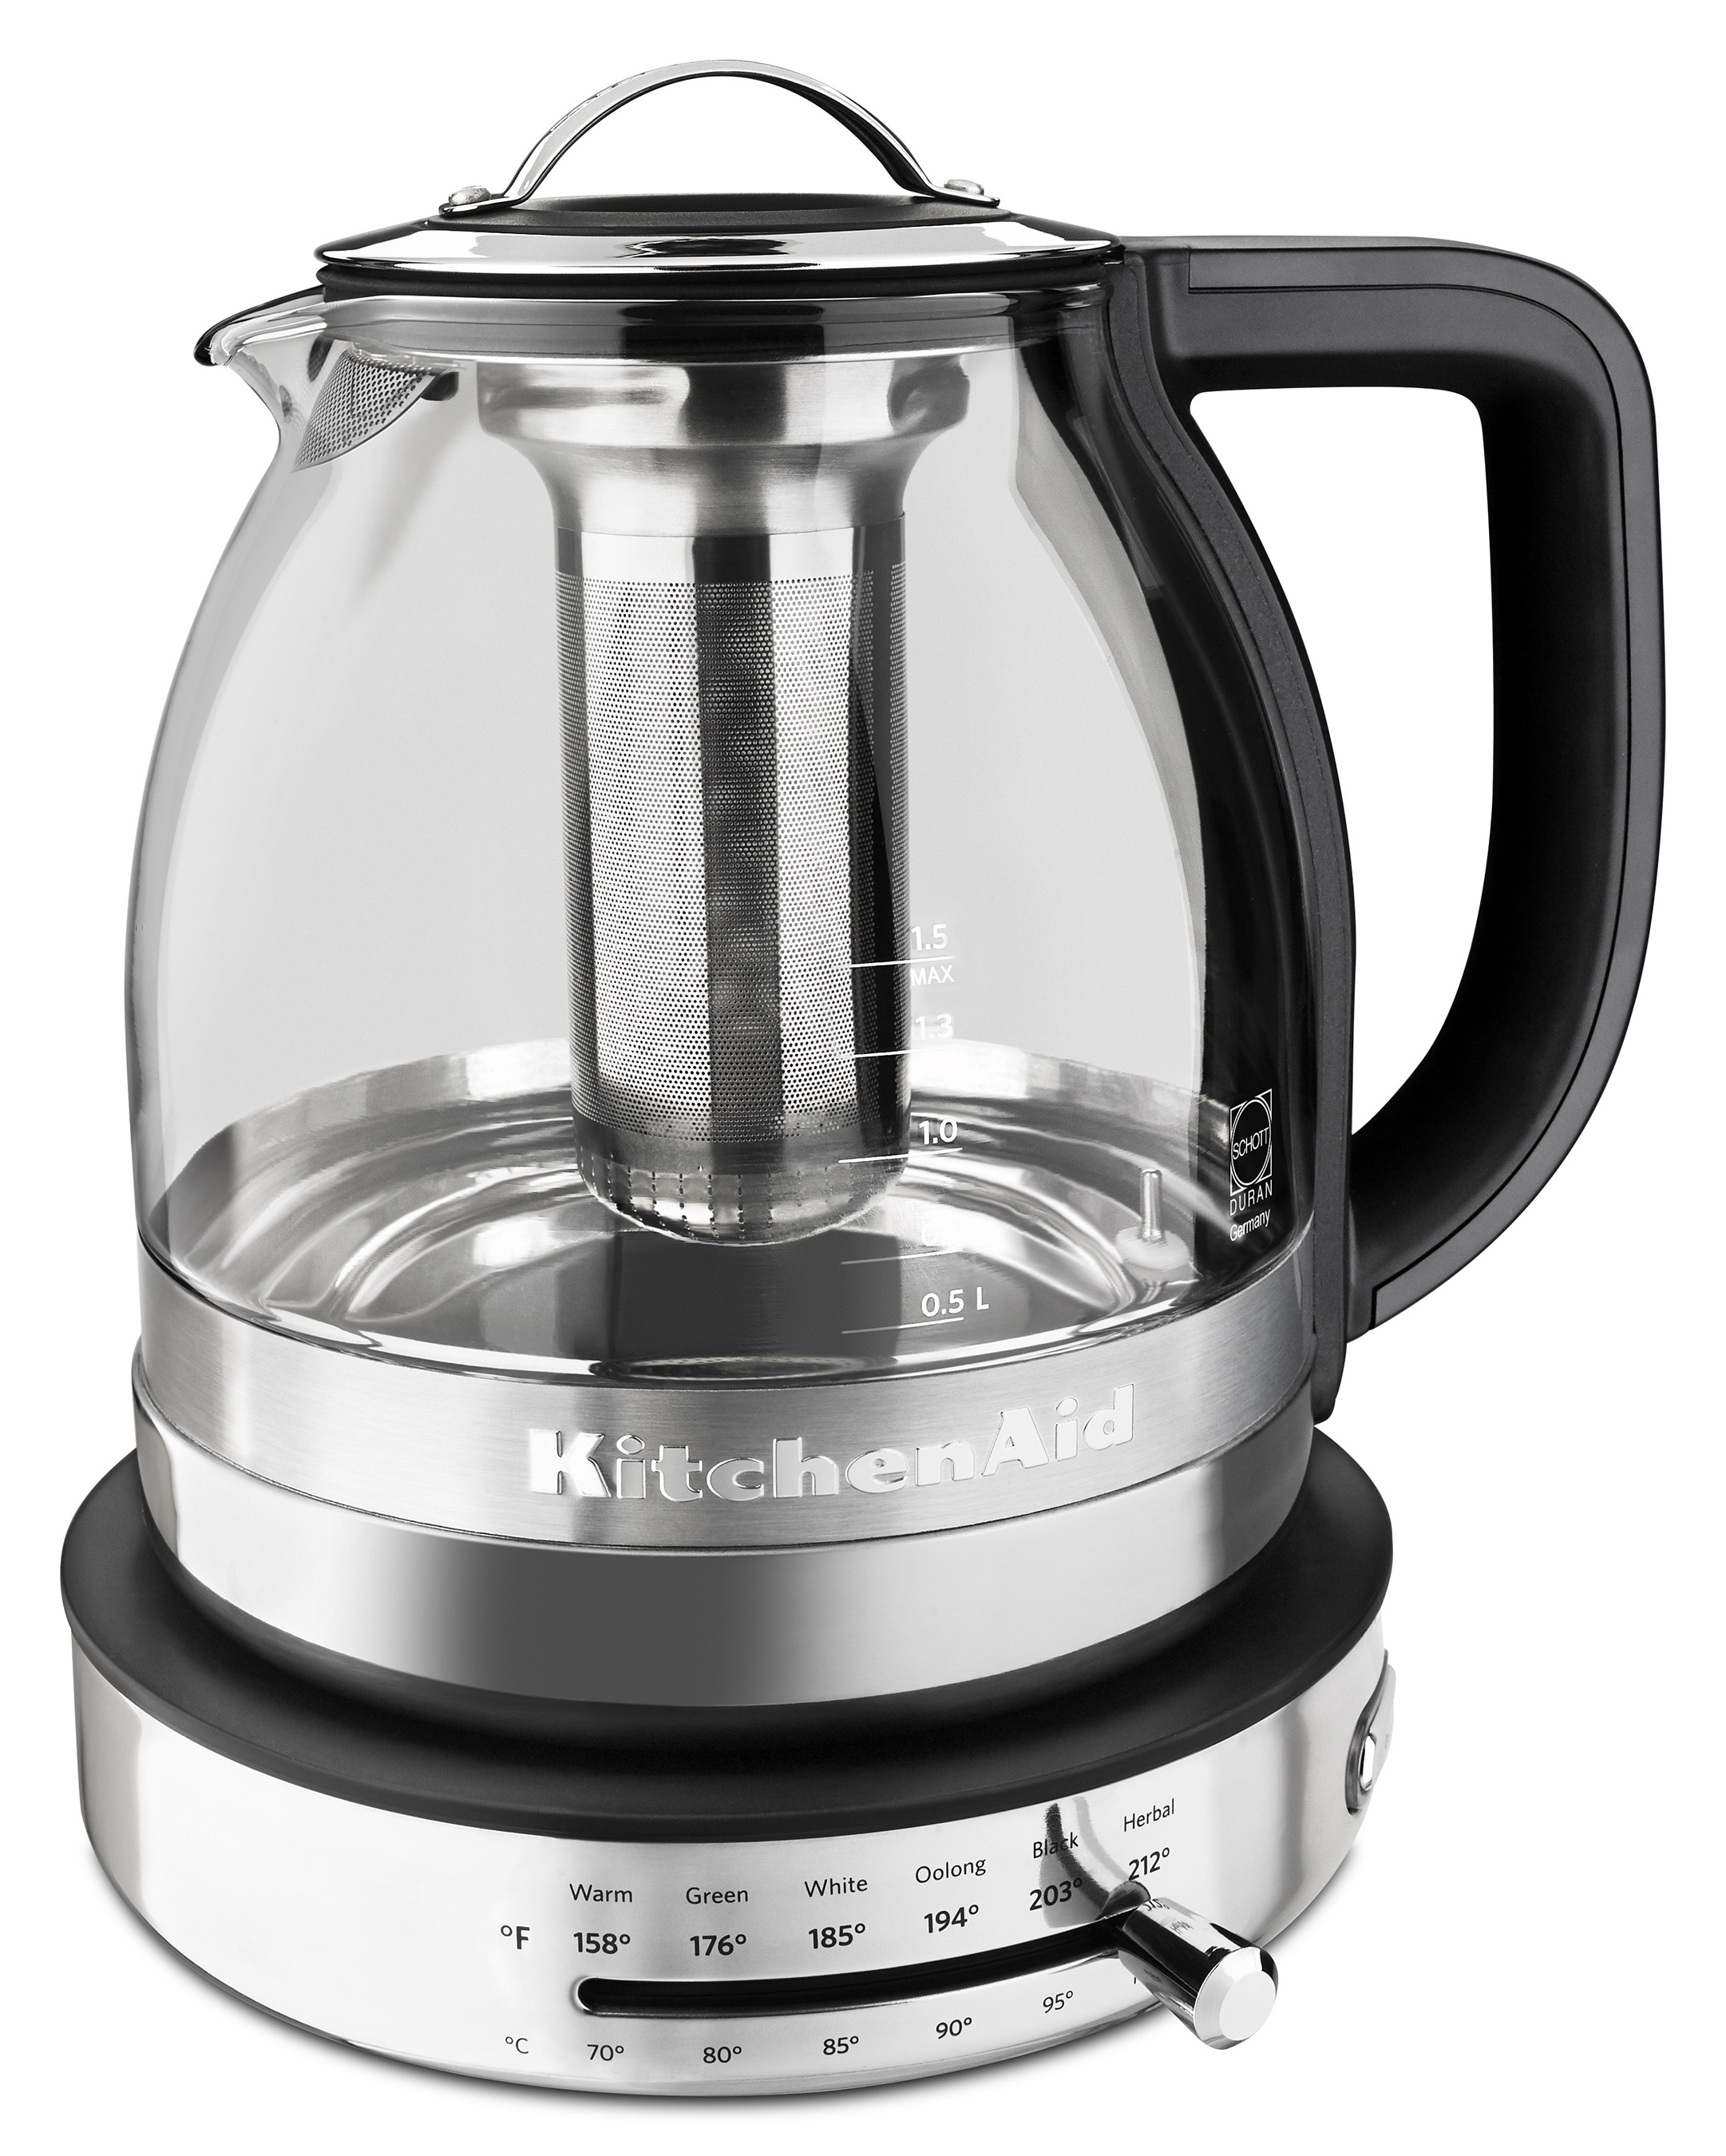 The new KitchenAid® Glass Tea Kettle with preset settings offers tea lovers easy mastery of the perfect cup.